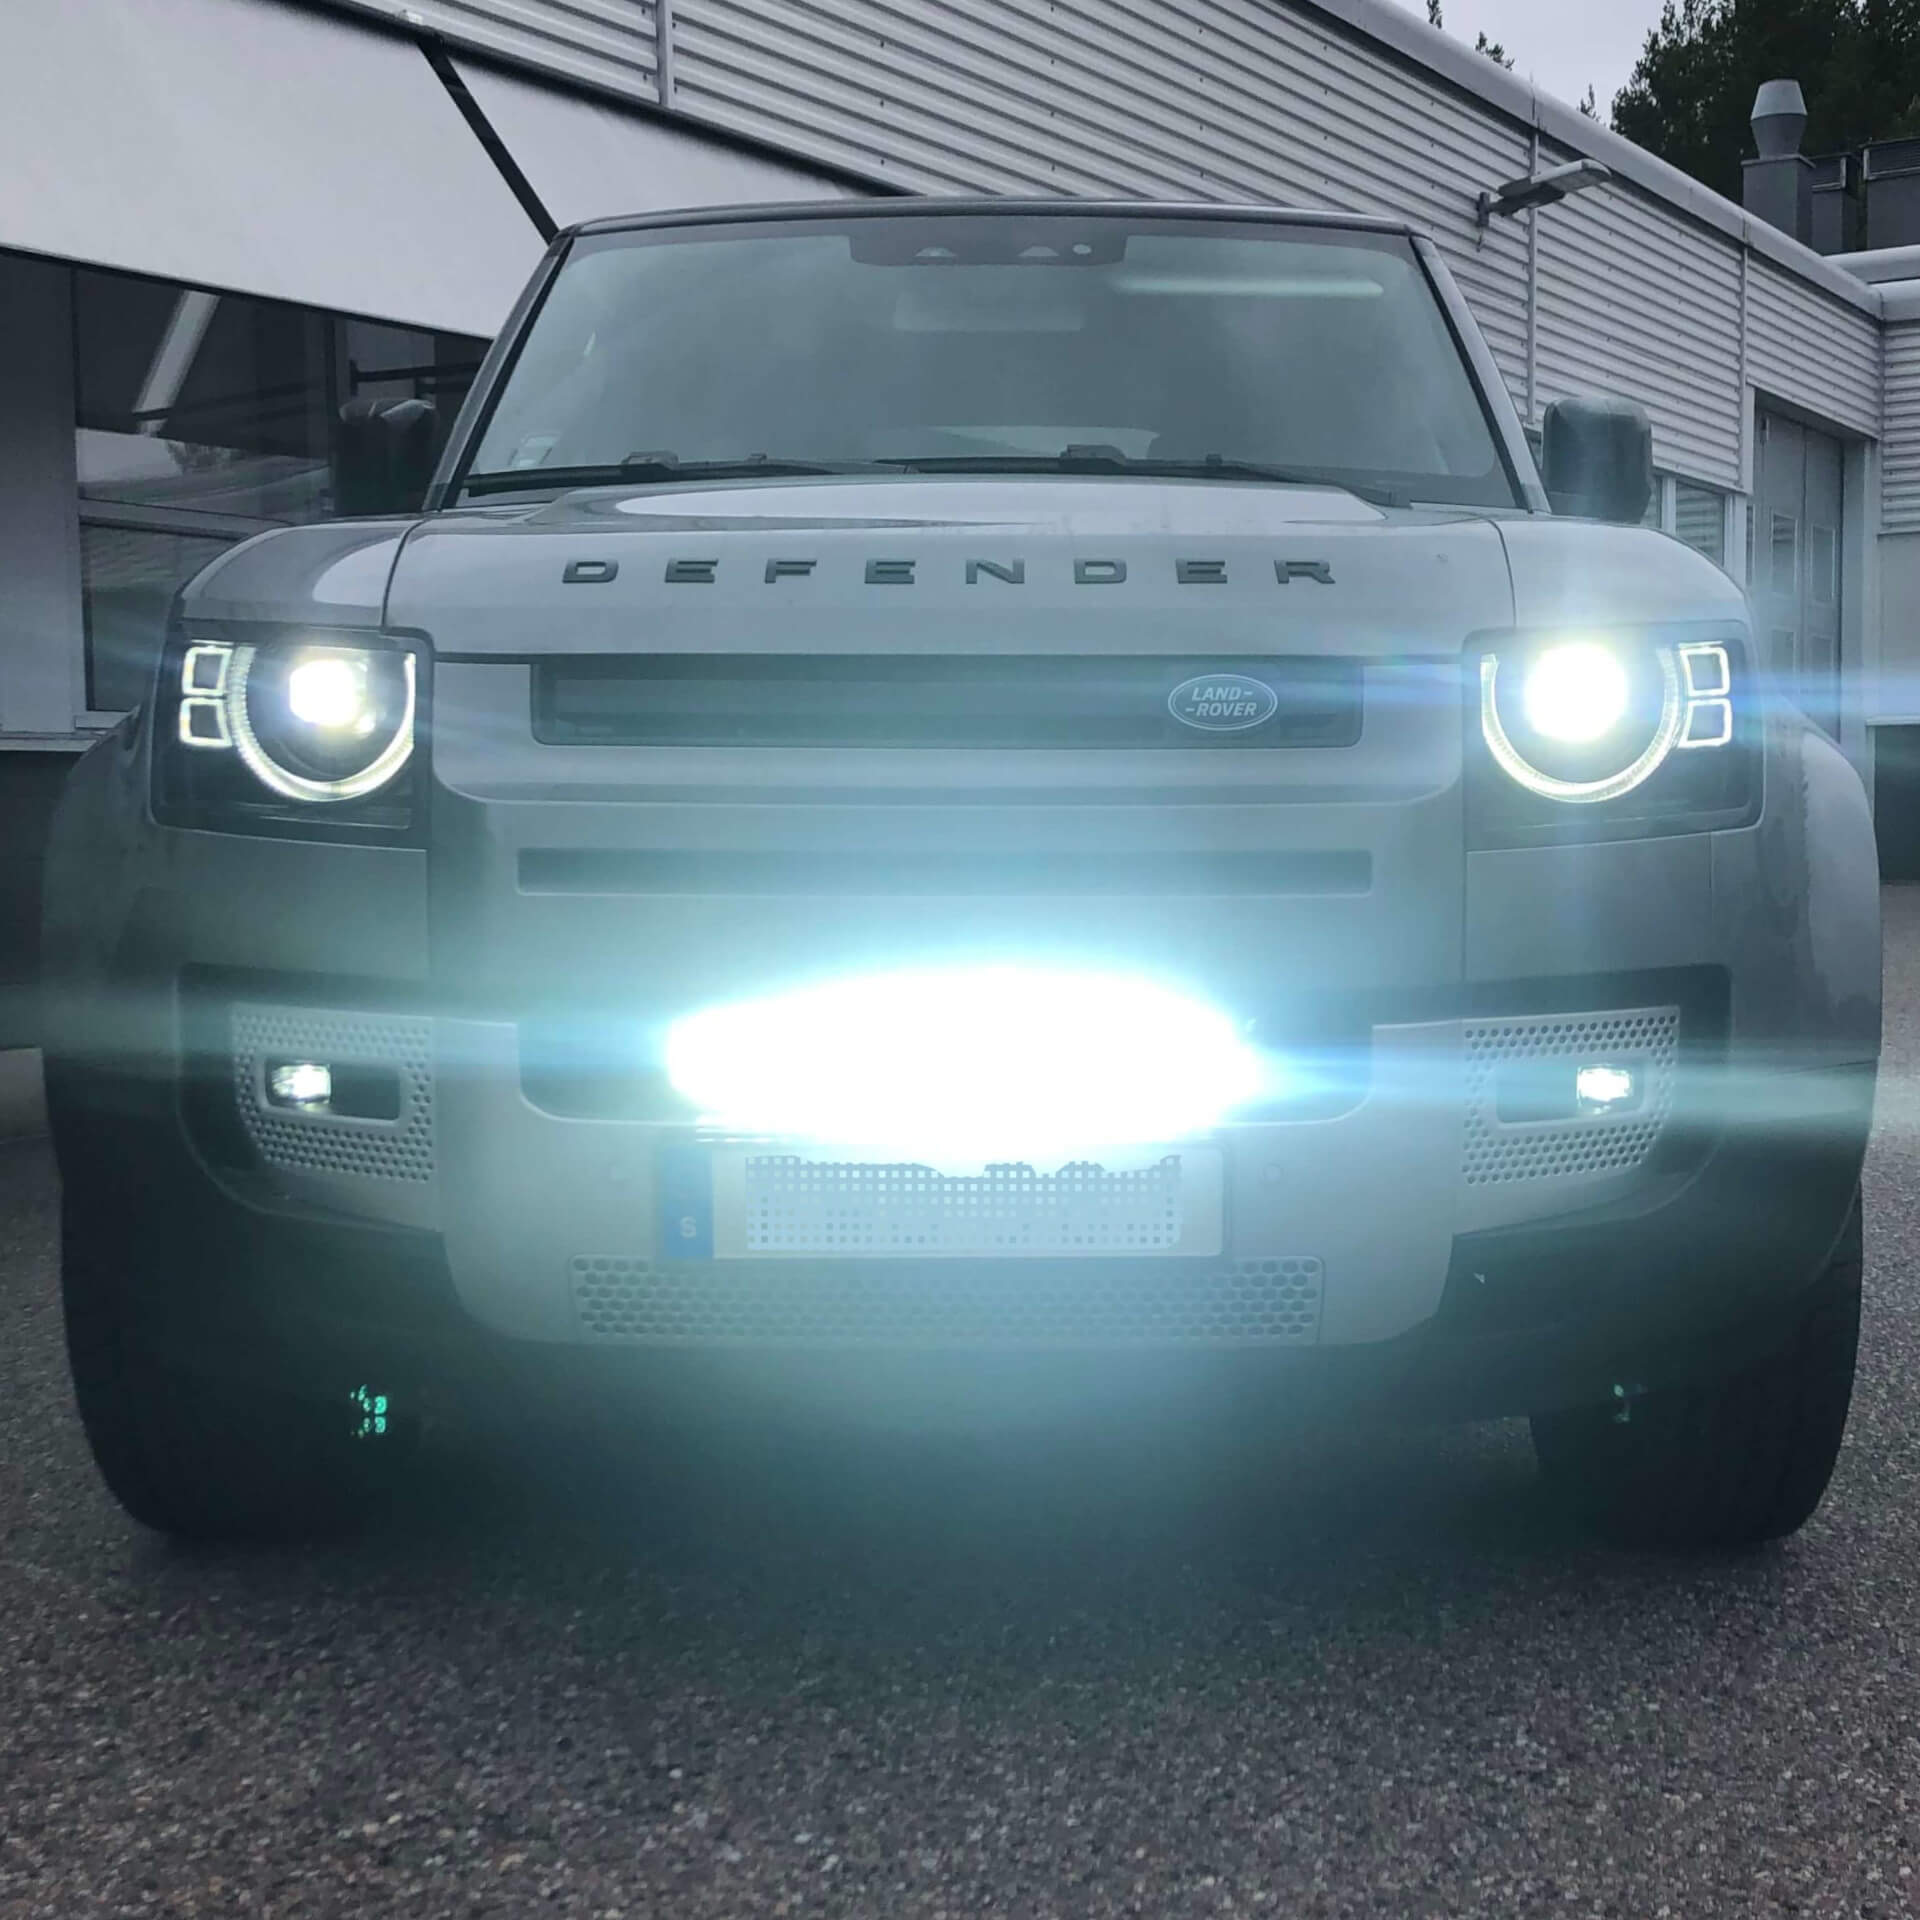 Land Rover Defender 2020- Vehicle Specific AUX Light kit, Vision X